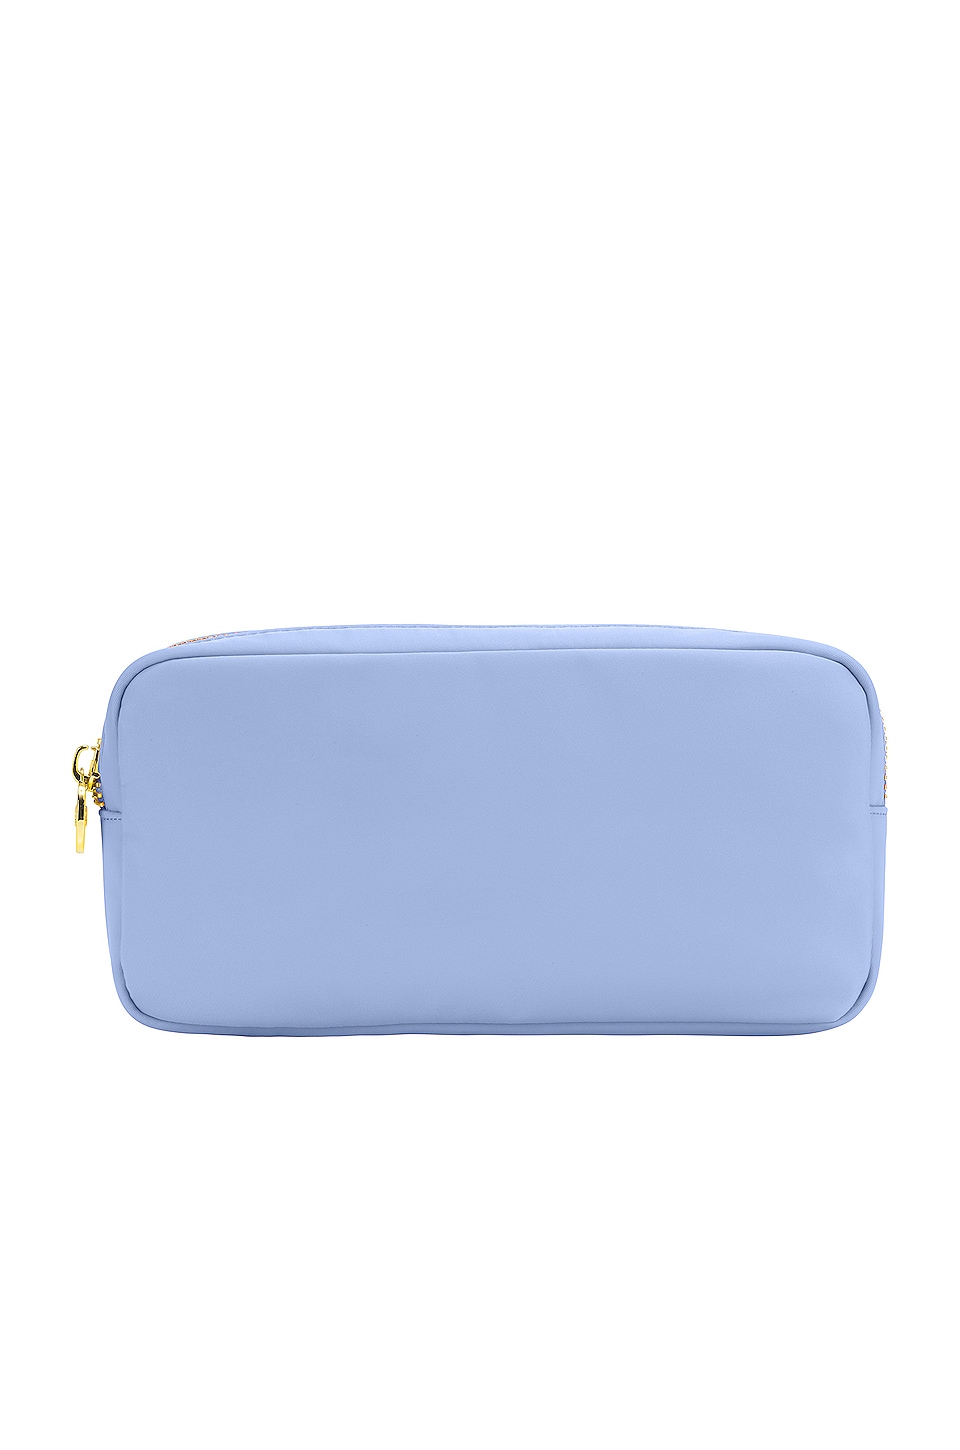 Stoney Clover Lane Classic Small Pouch in Periwinkle